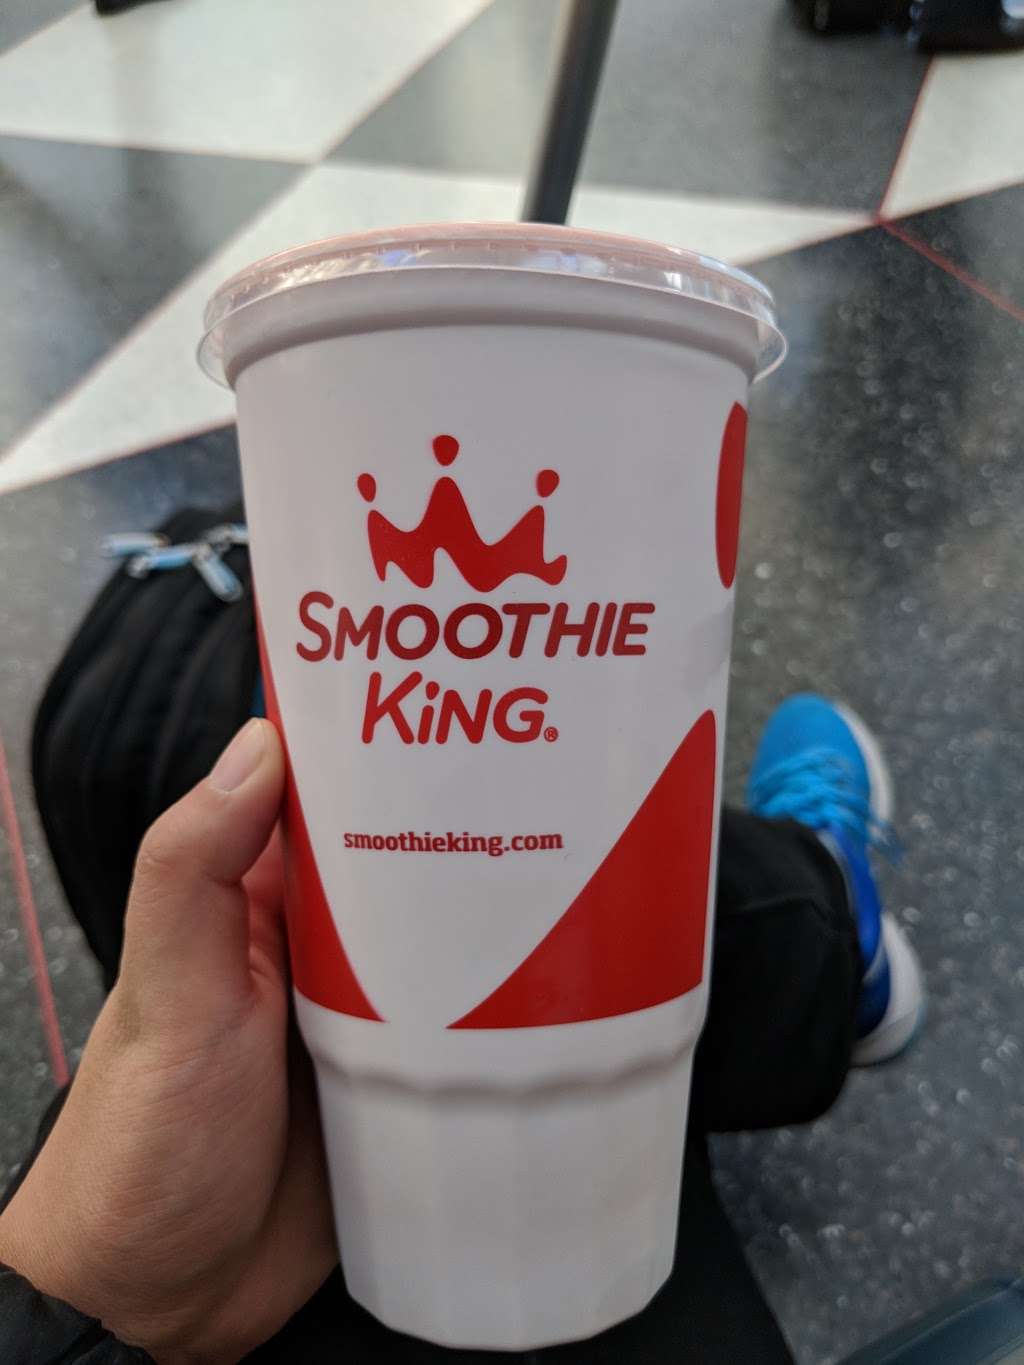 Smoothie King | United Terminal 1 Gate B-6, Chicago OHare Airport, Chicago, IL 60666 | Phone: (800) 577-4200